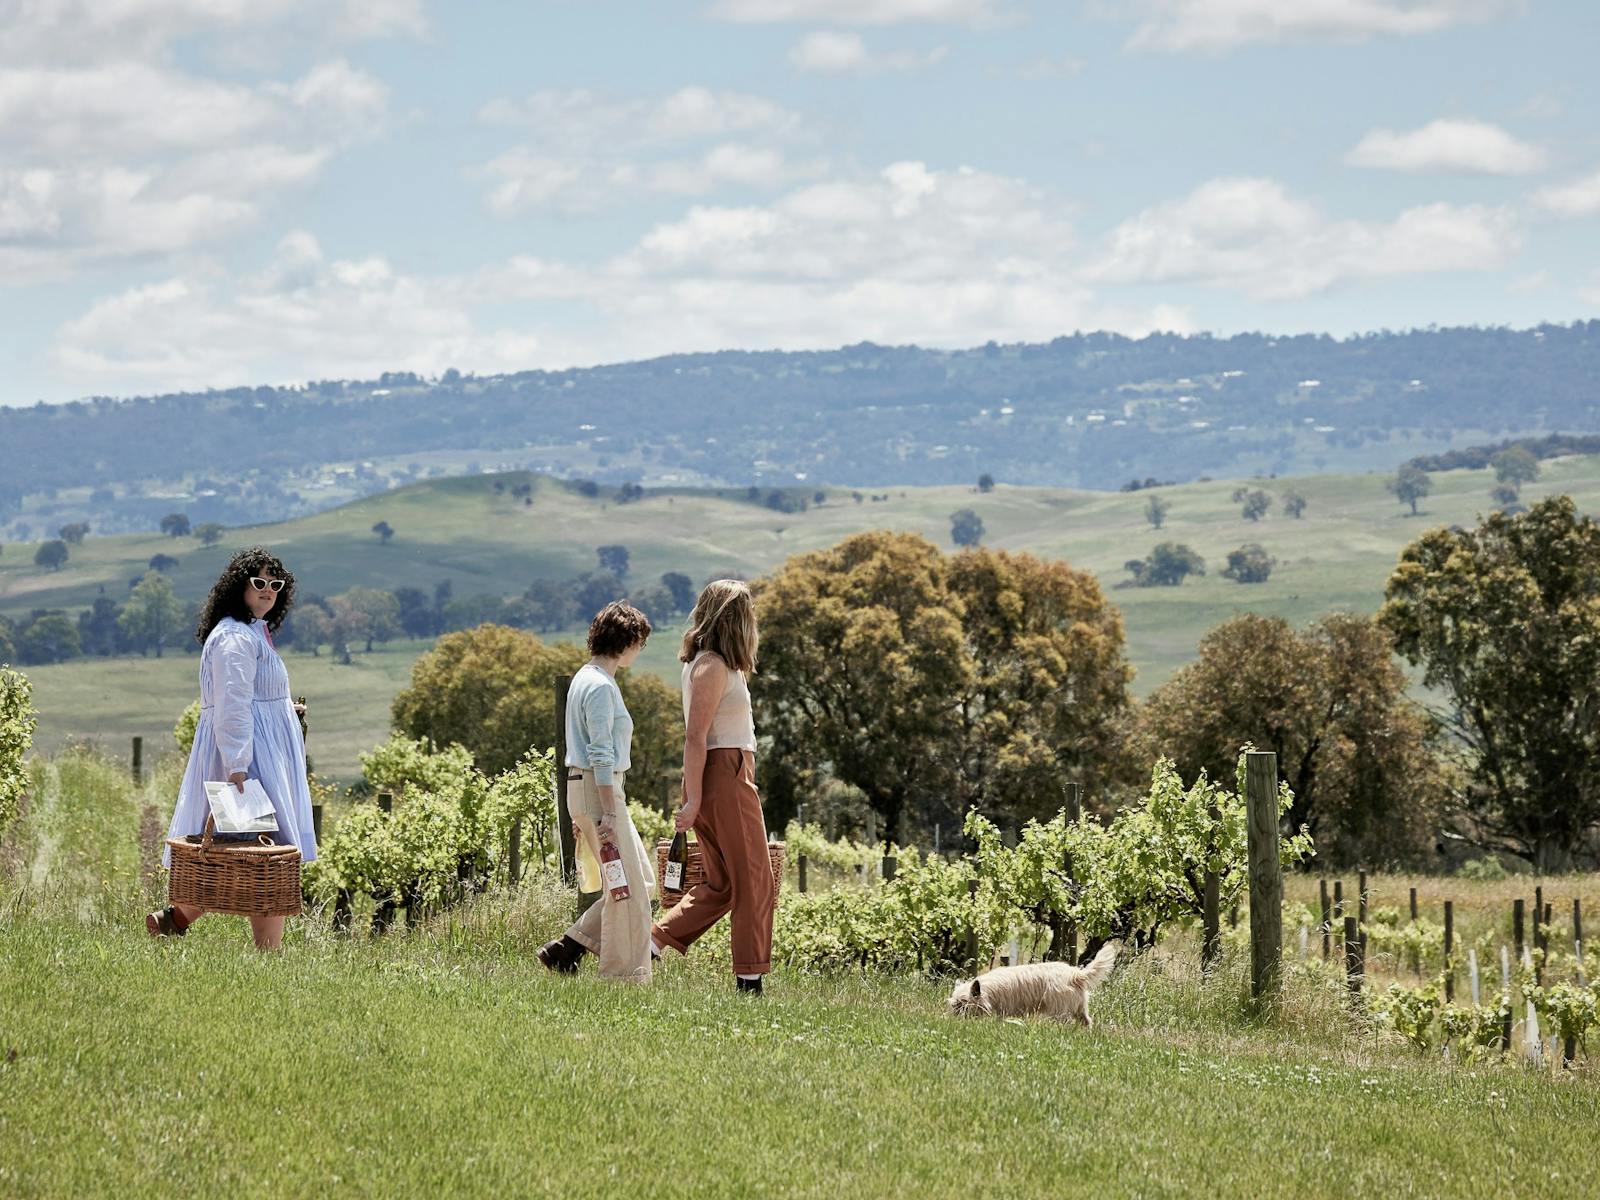 Three women walking in front of vines with a dog, carrying bottles of wine and a picnic basket